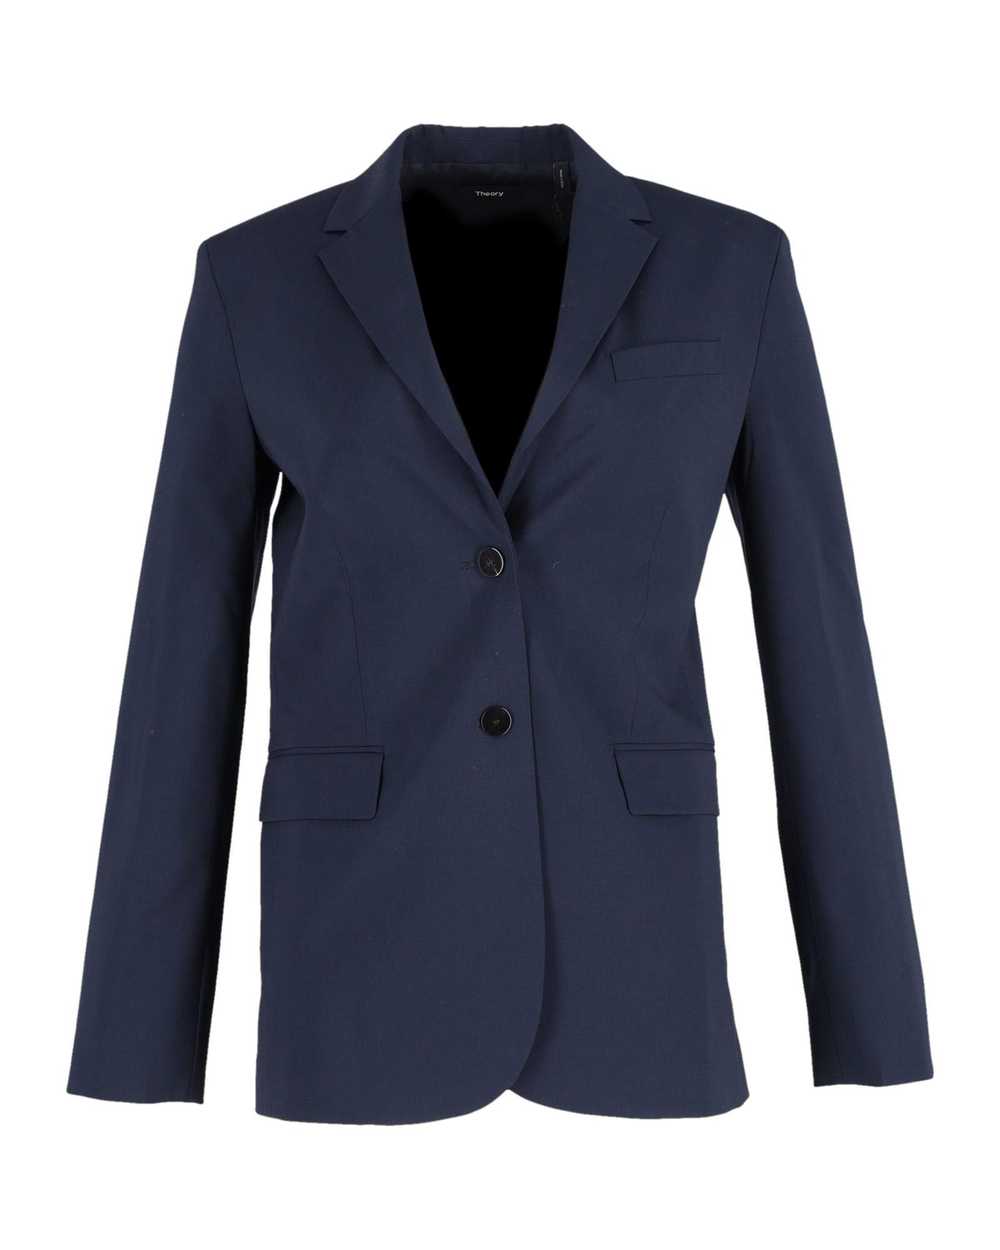 Theory Navy Blue Single-Breasted Blazer Jacket in… - image 1